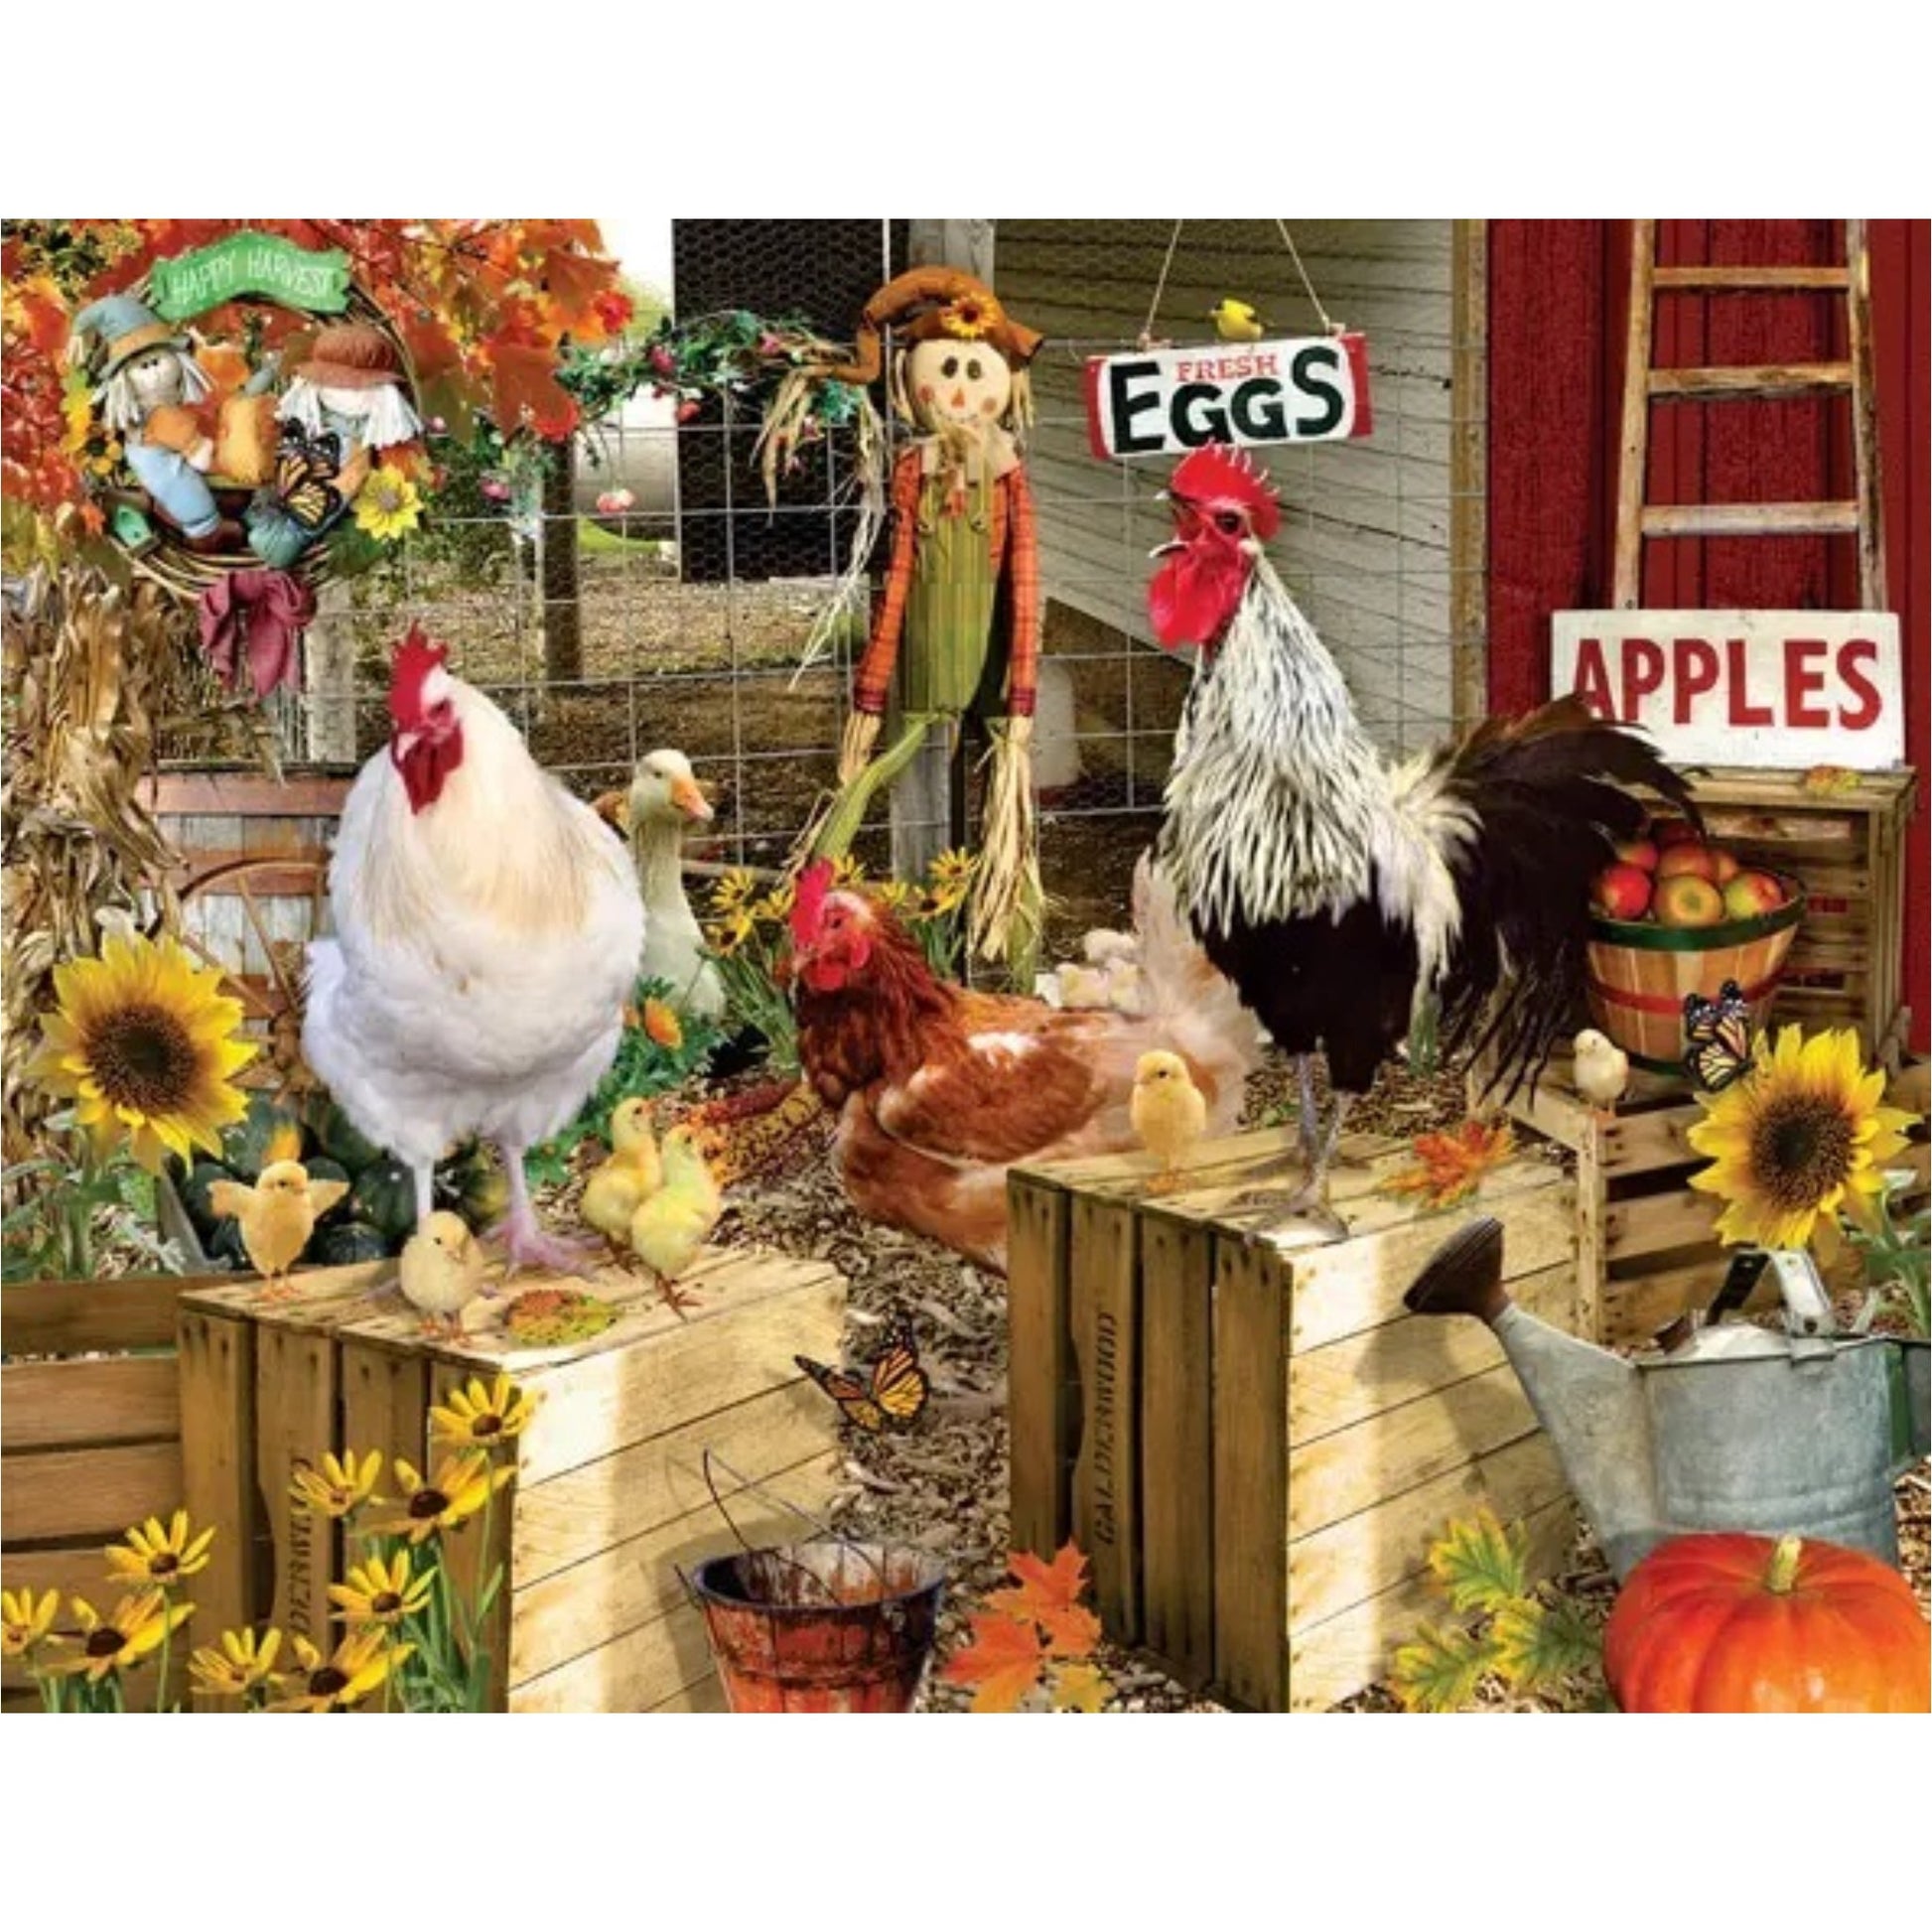 Chickens on the Farm Puzzle - Made in the USA